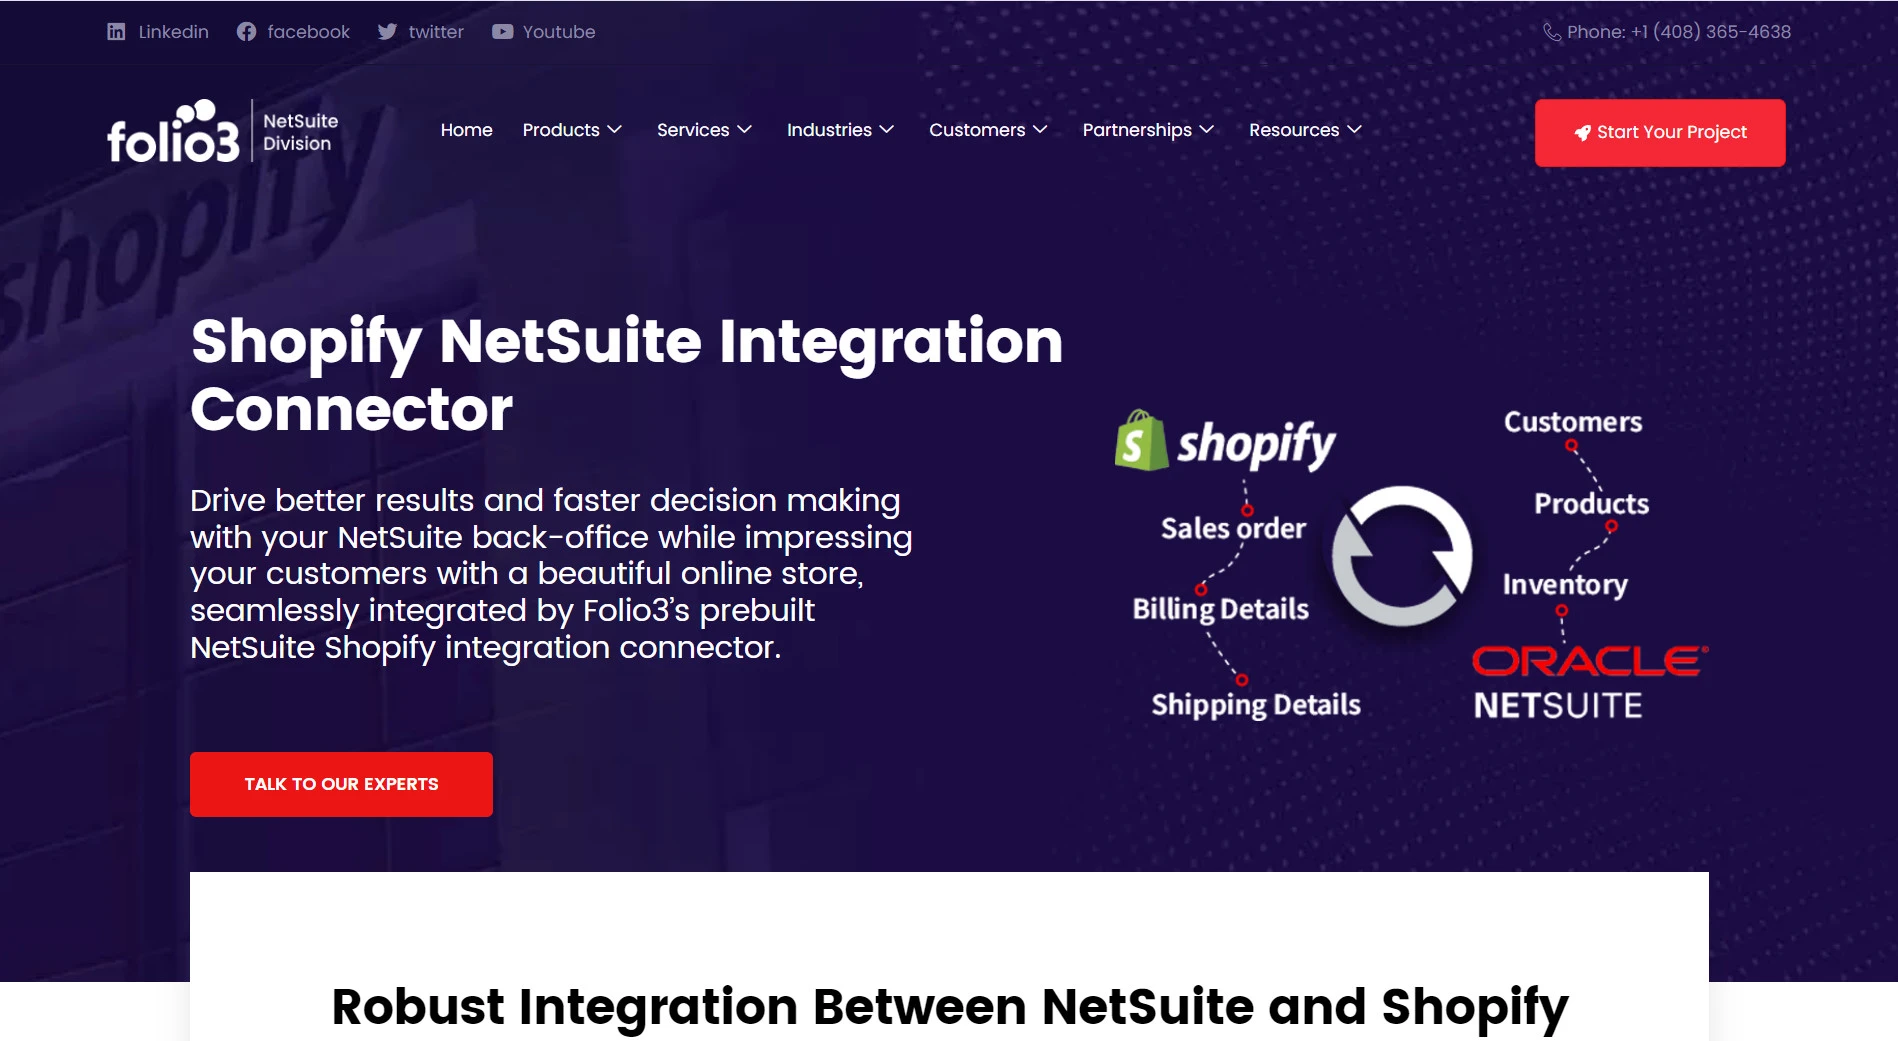 Folio3 NetSuite and Shopify integration